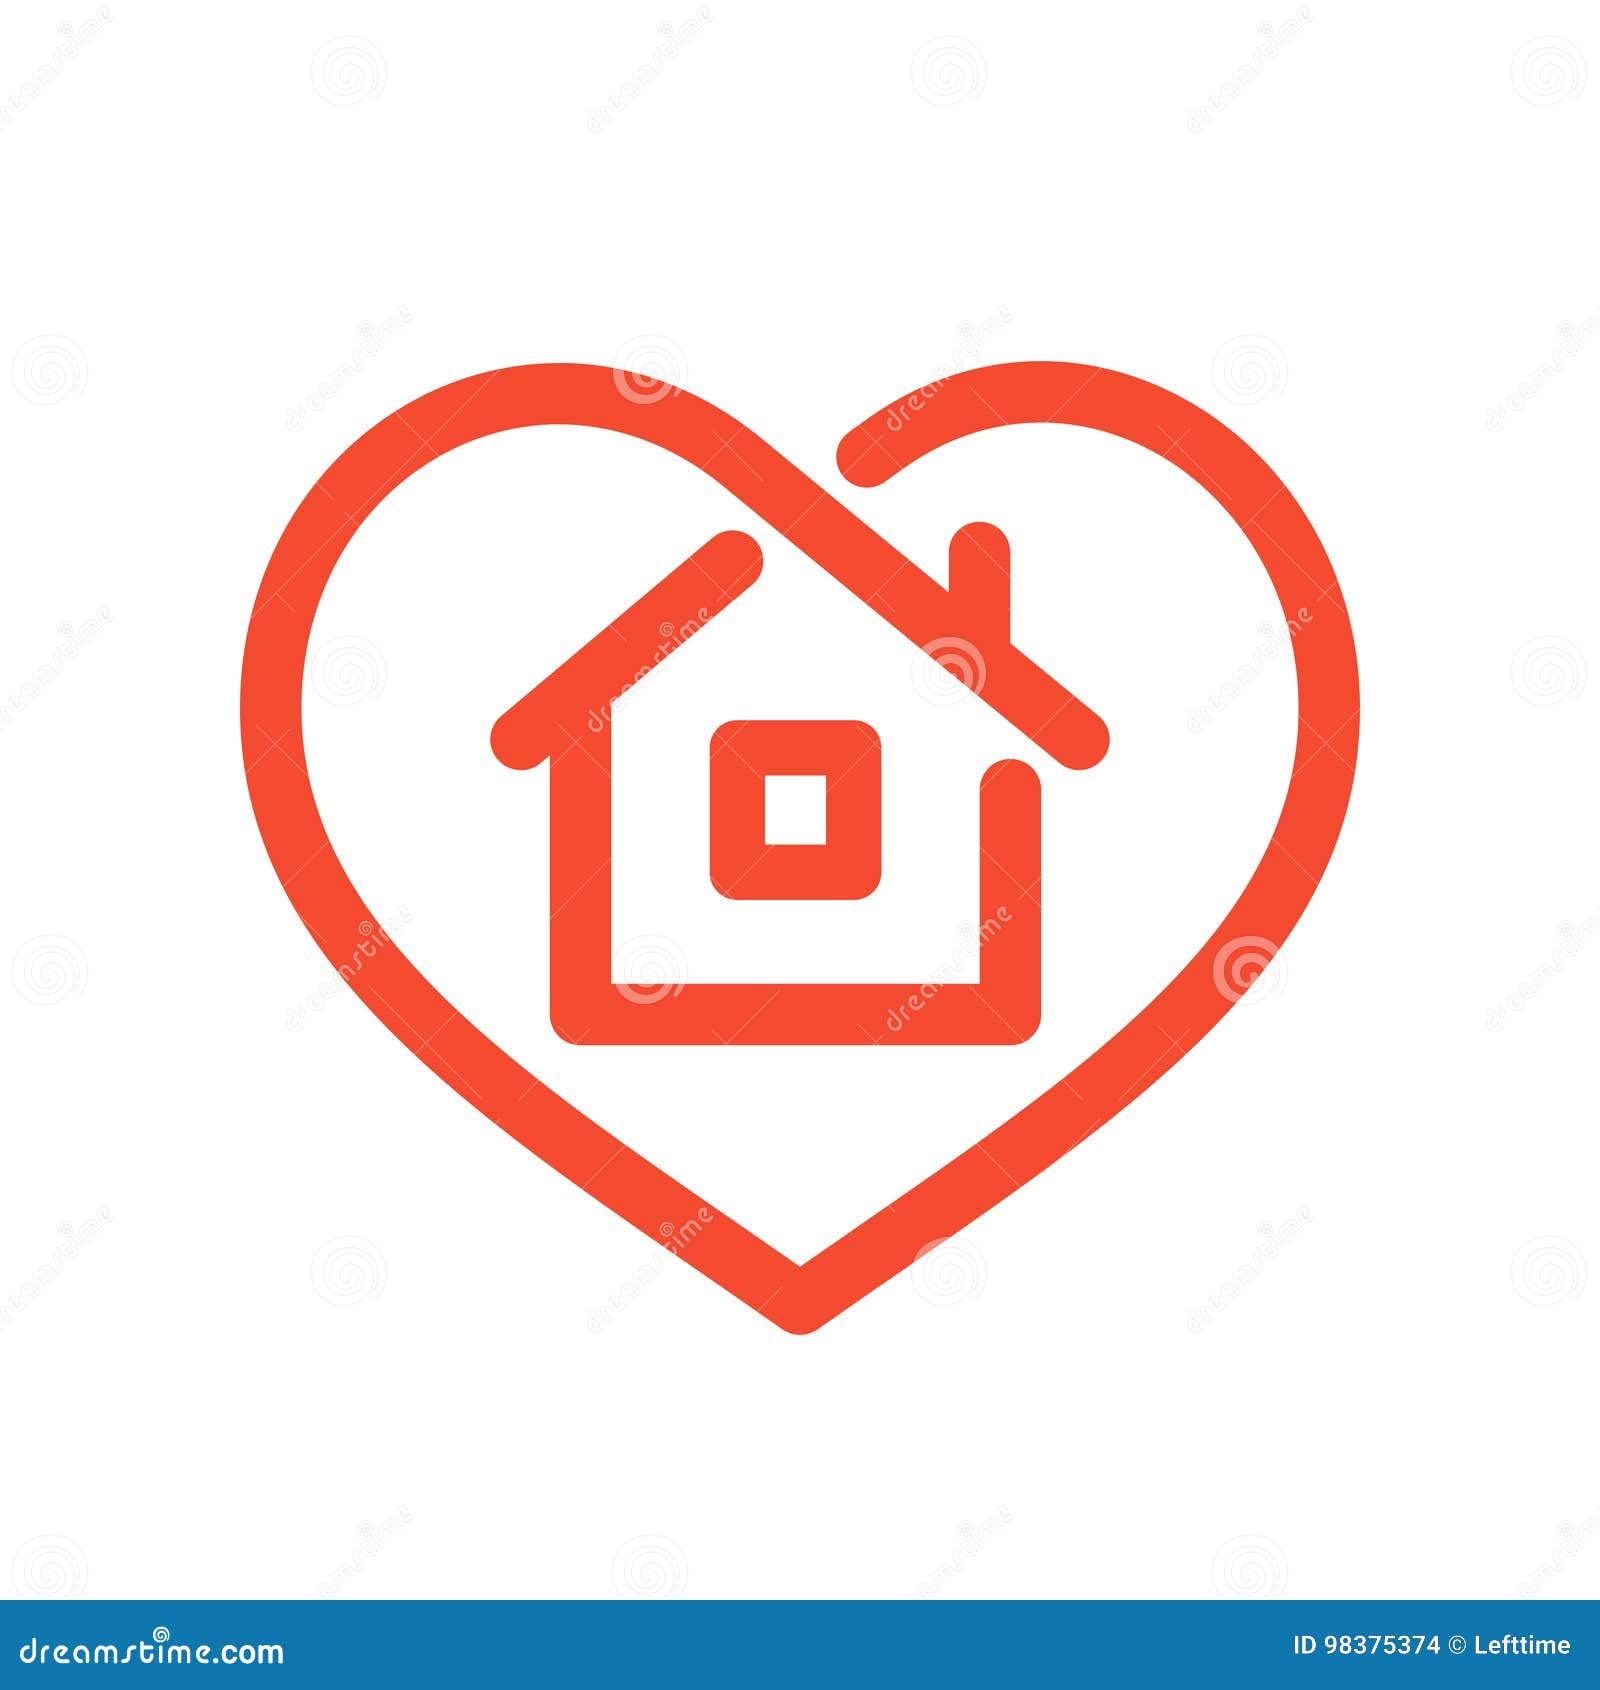 Bedachtzaam krant jukbeen House in heart stock vector. Illustration of house, abstract - 98375374